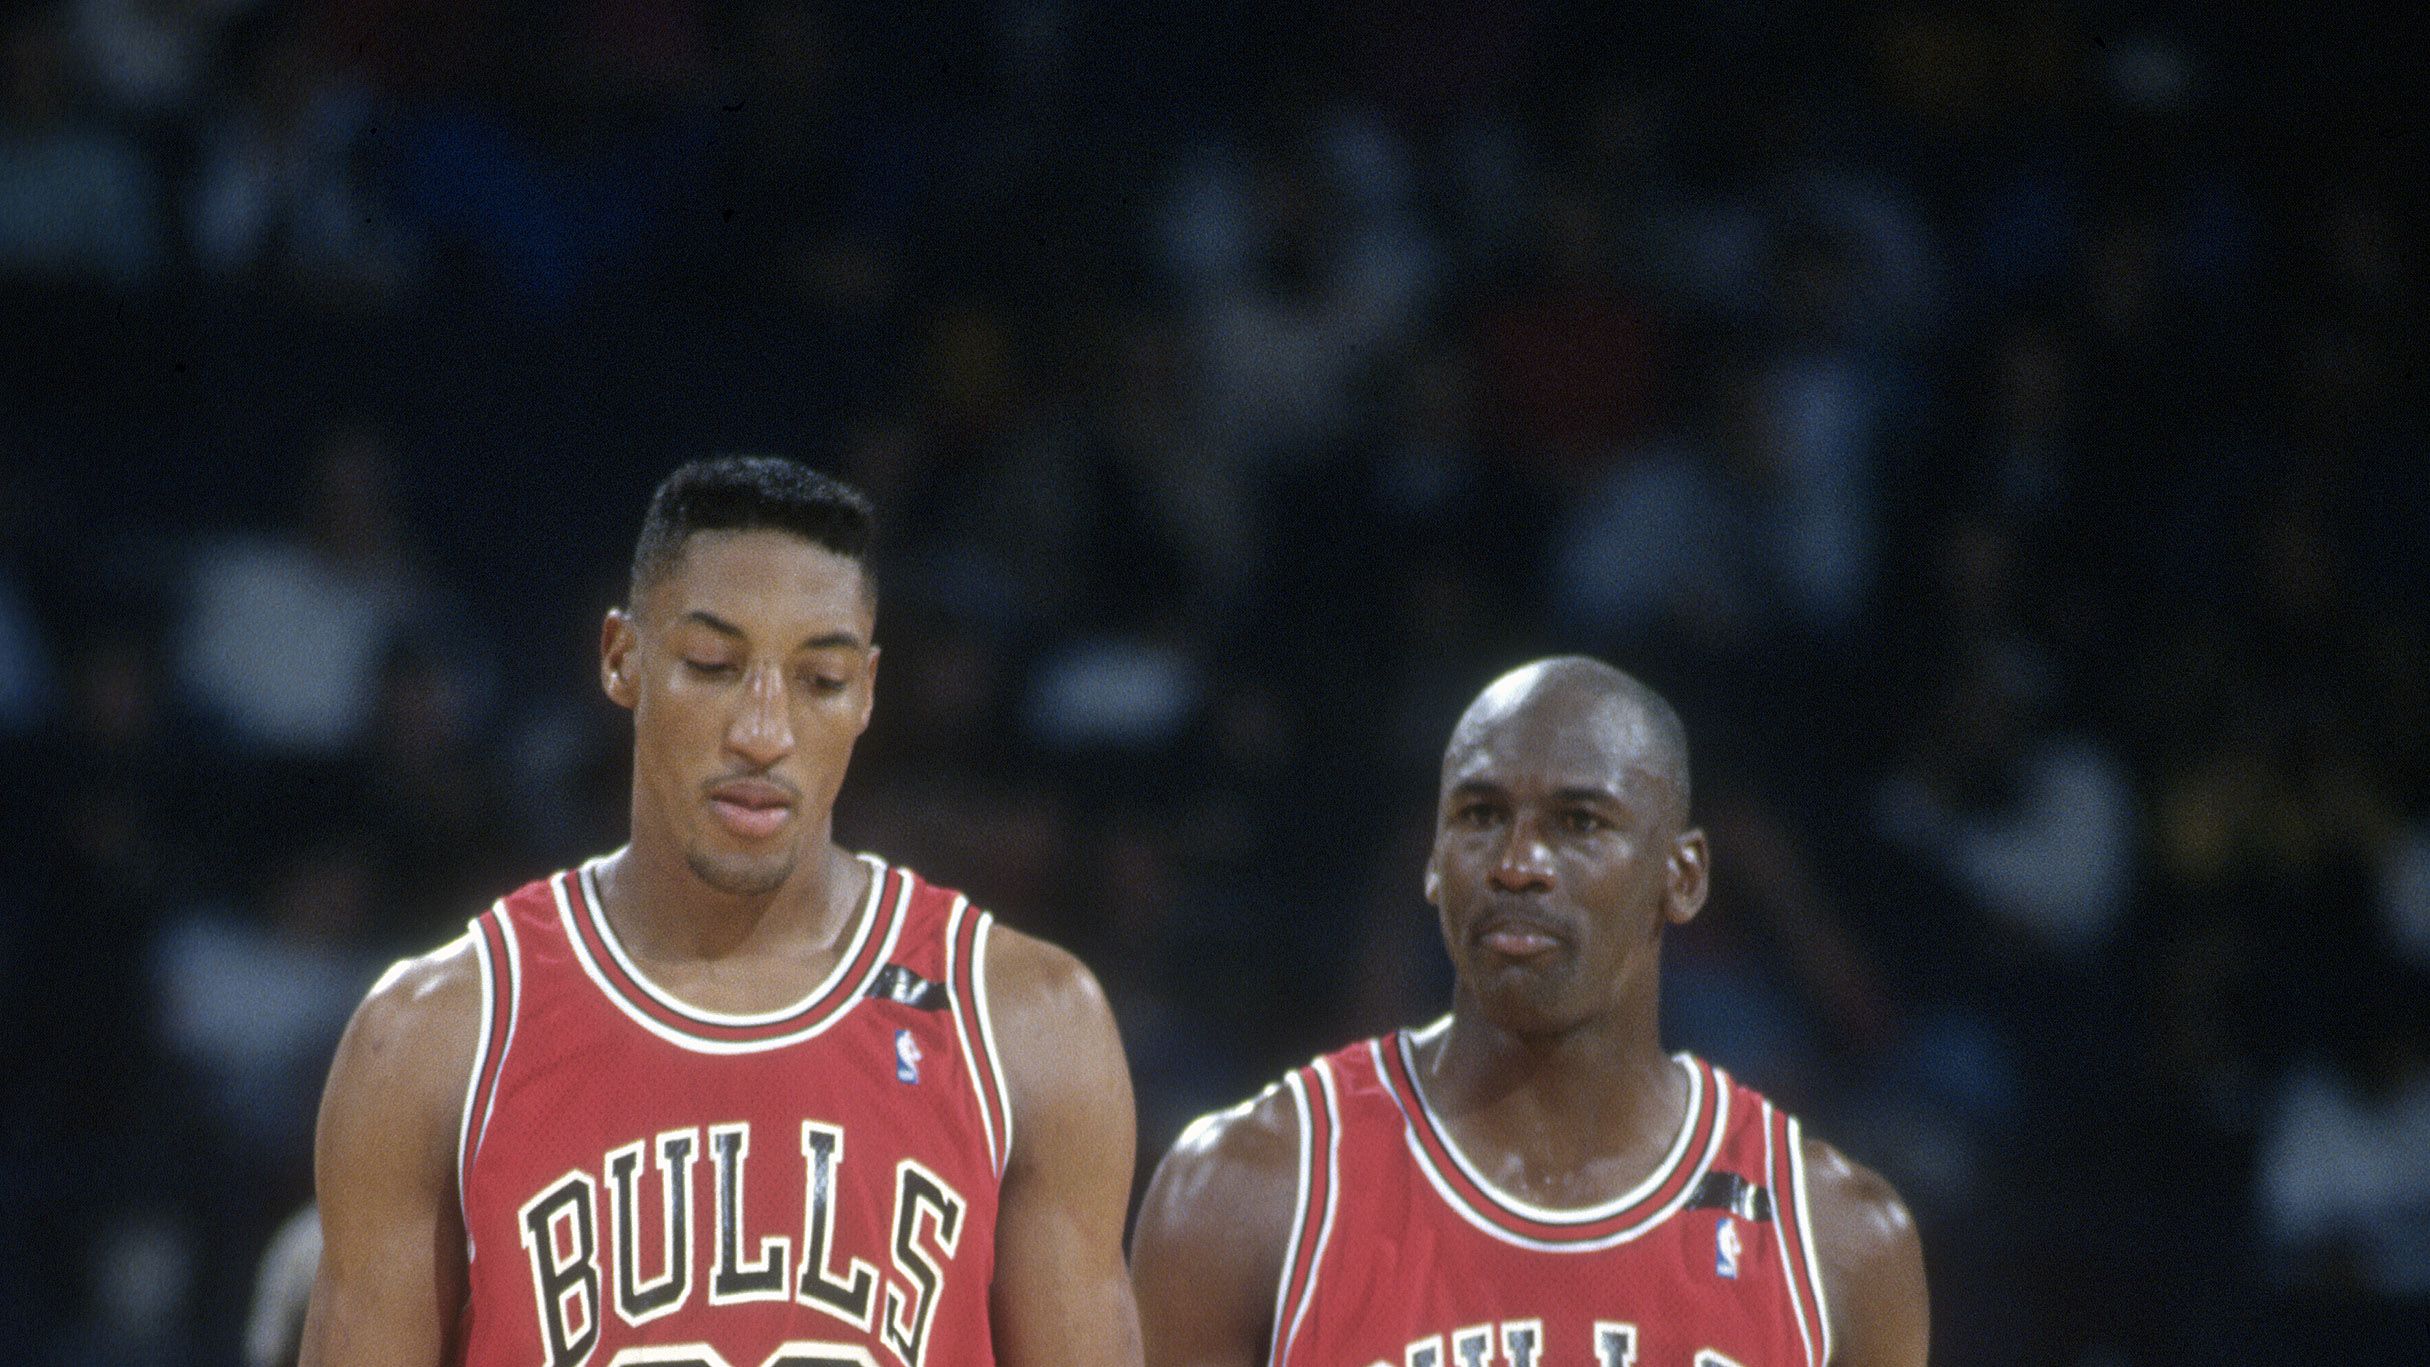 The Last Dance: A look at Scottie Pippen's contract and why was he